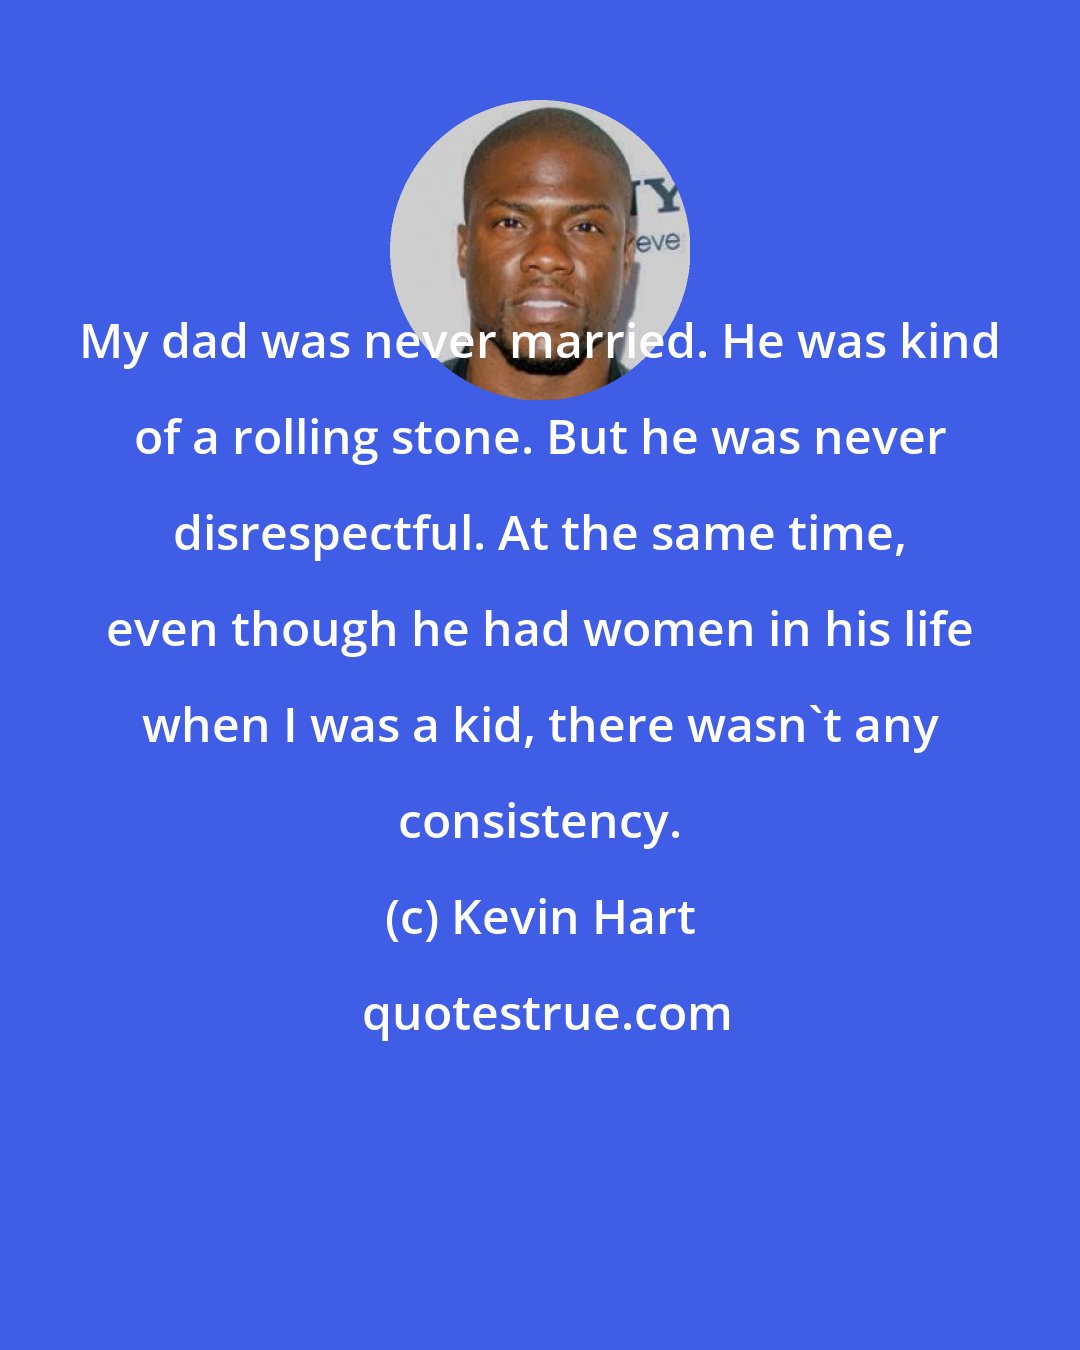 Kevin Hart: My dad was never married. He was kind of a rolling stone. But he was never disrespectful. At the same time, even though he had women in his life when I was a kid, there wasn't any consistency.